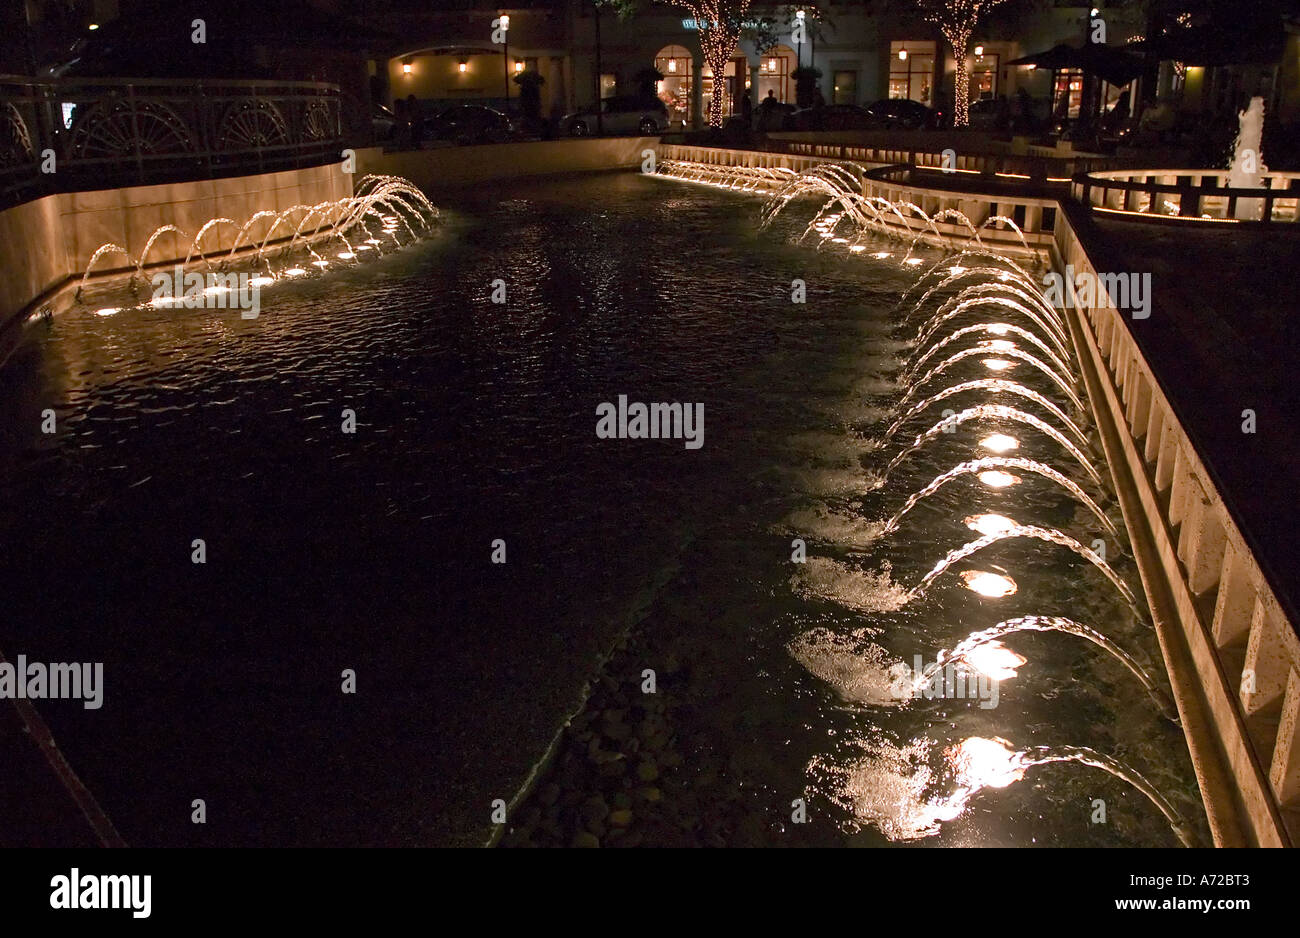 Night view of illuminated fountains in front of Il Bellagio restaurant City Place West Palm Beach Florida Stock Photo